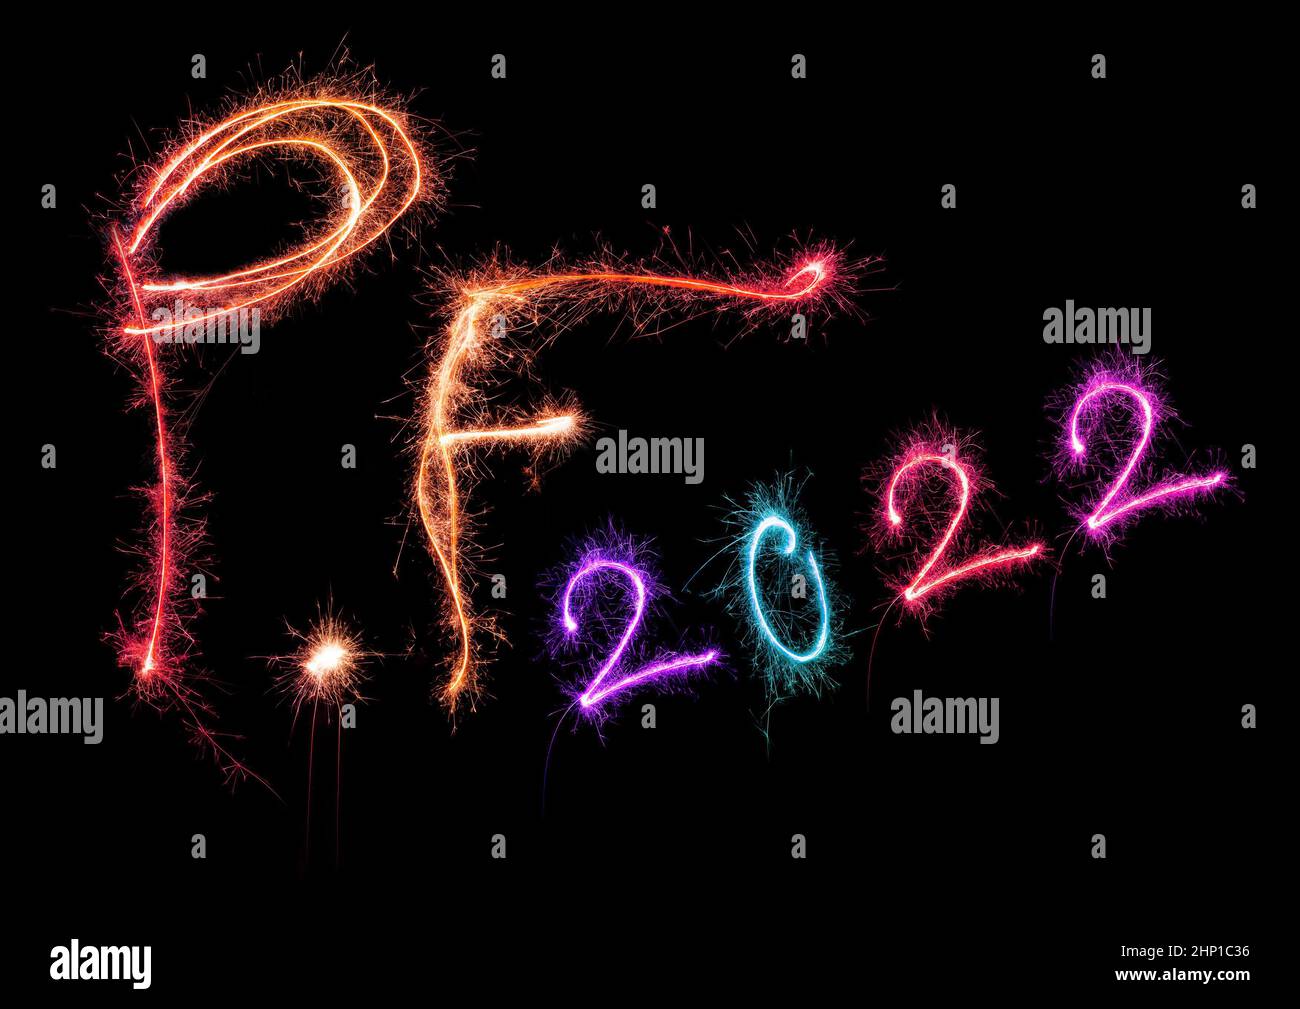 New year greeting card. P.f. pour feliciter 2022 made from sparkling colorful lights isolated on black background. Happy new year. Stock Photo